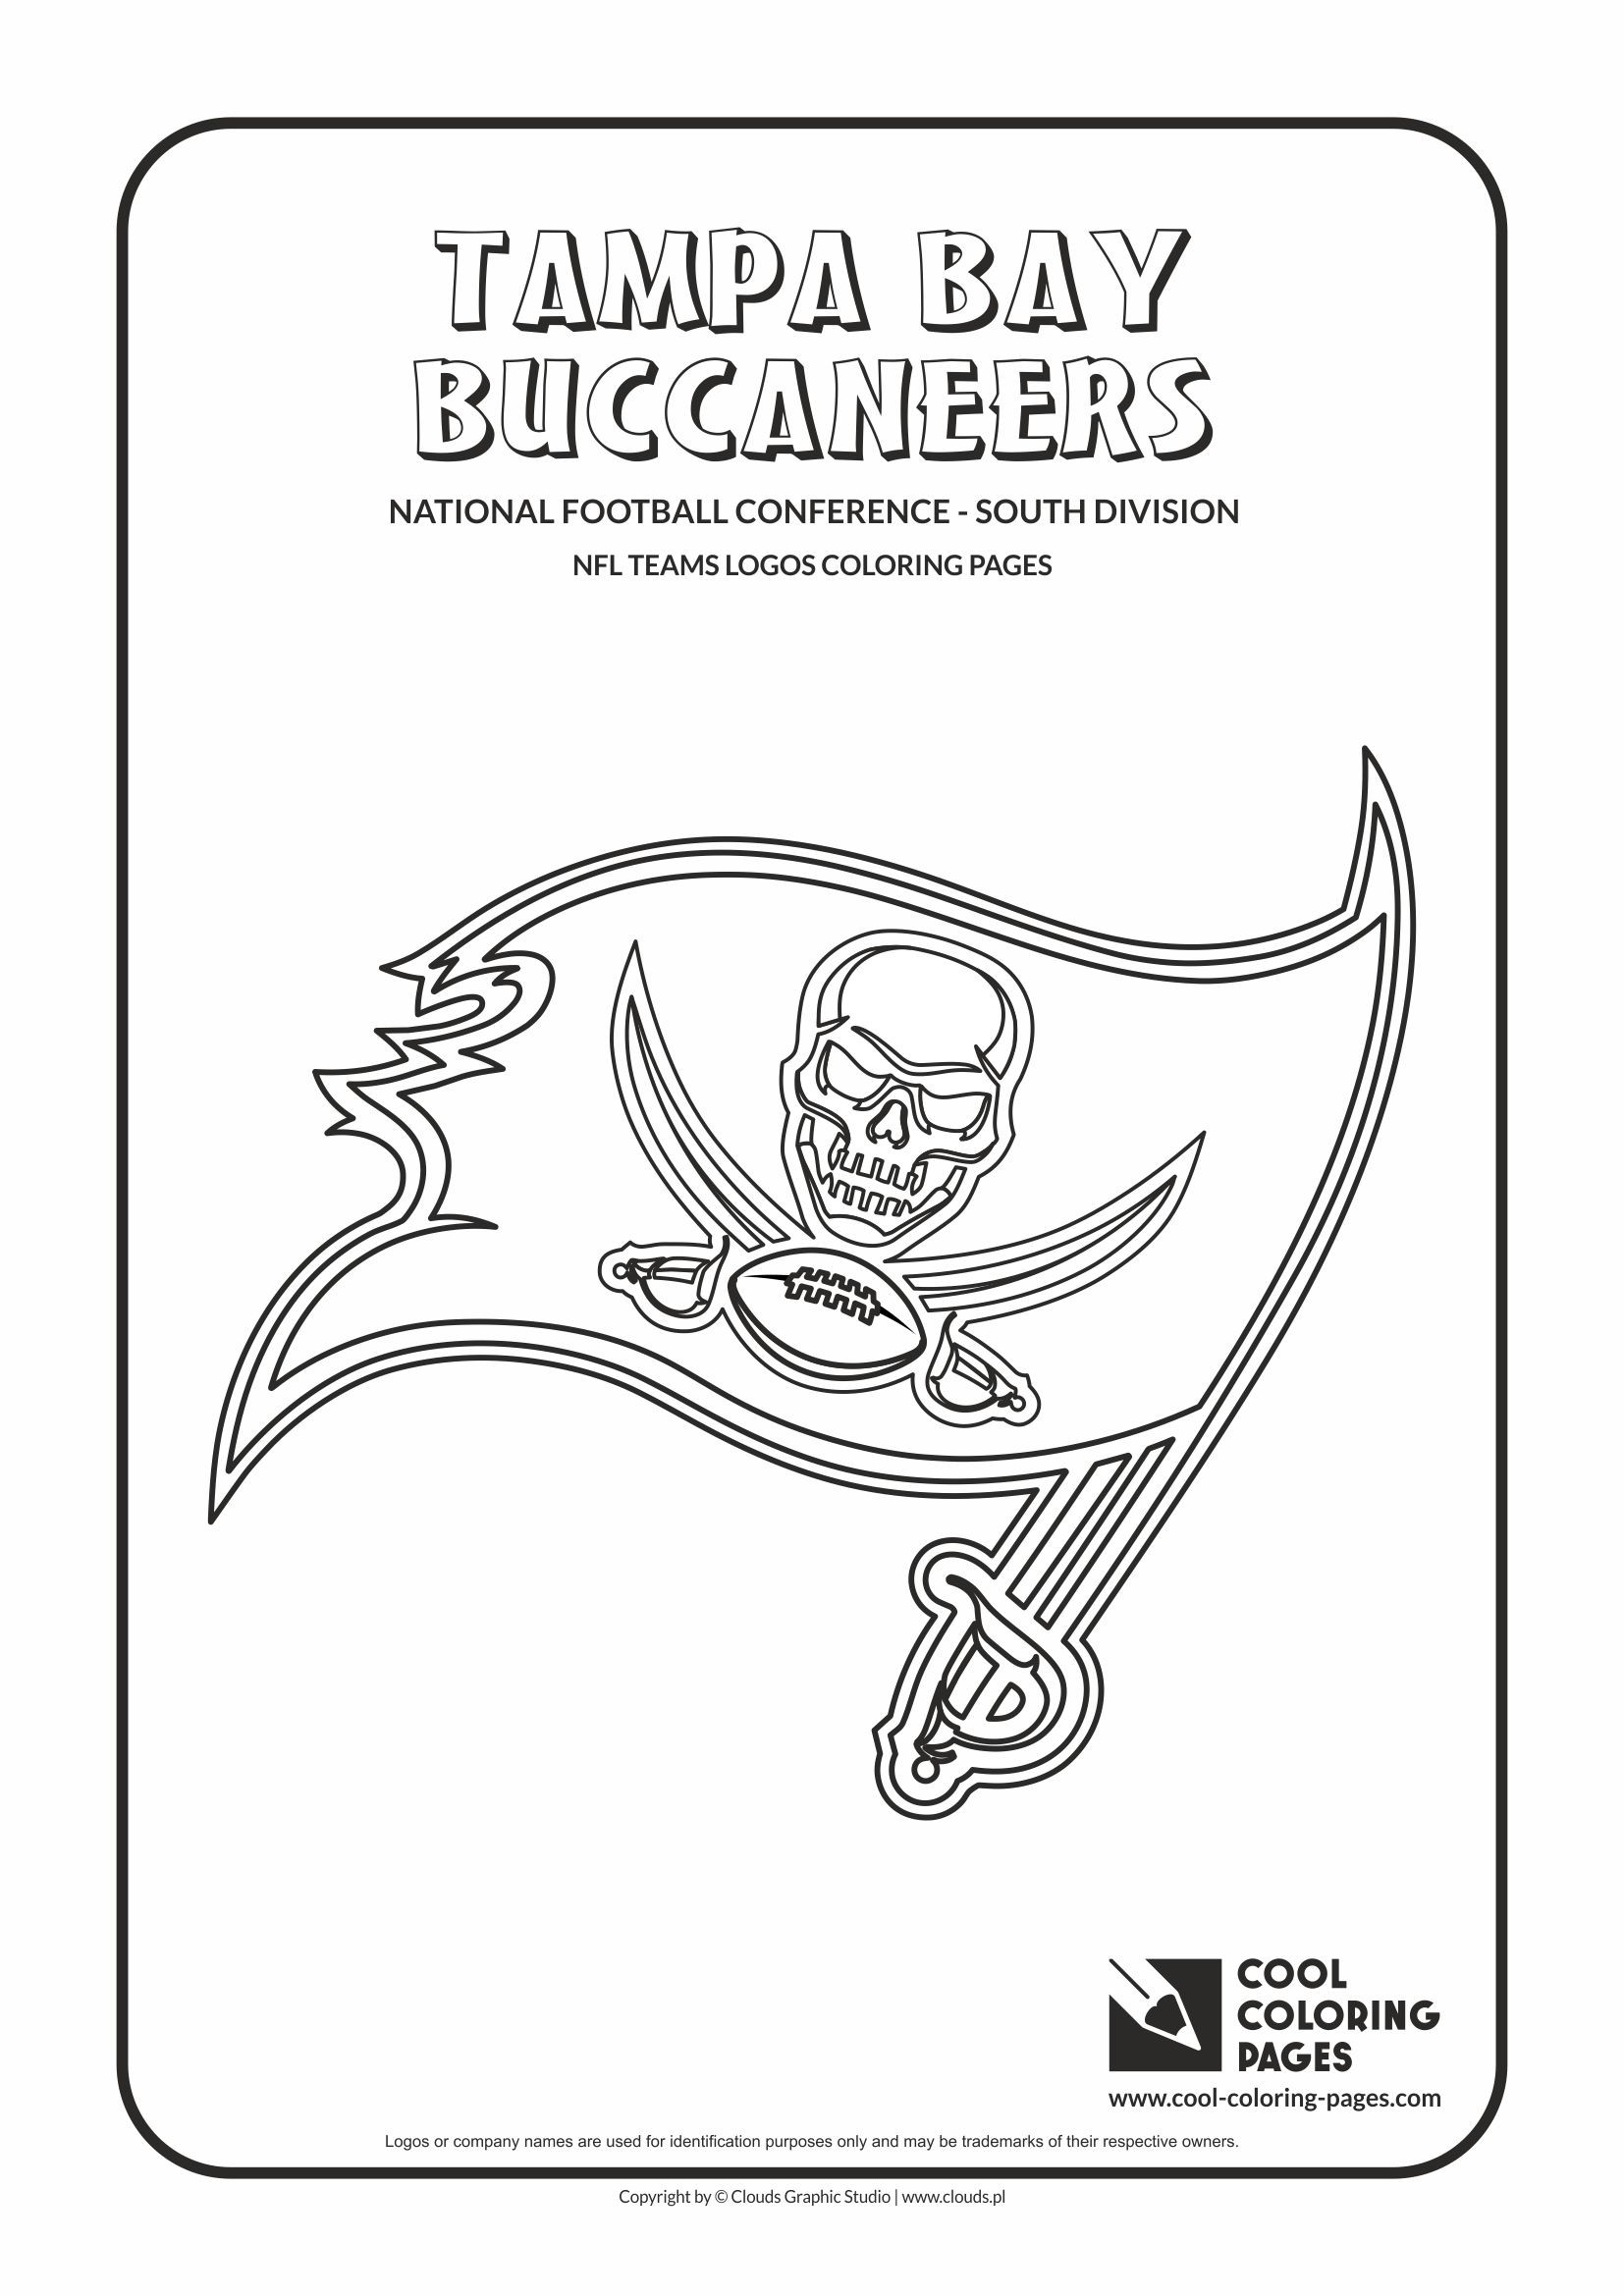 Nfl Logos Coloring Pages
 Cool Coloring Pages Tampa Bay Buccaneers NFL American